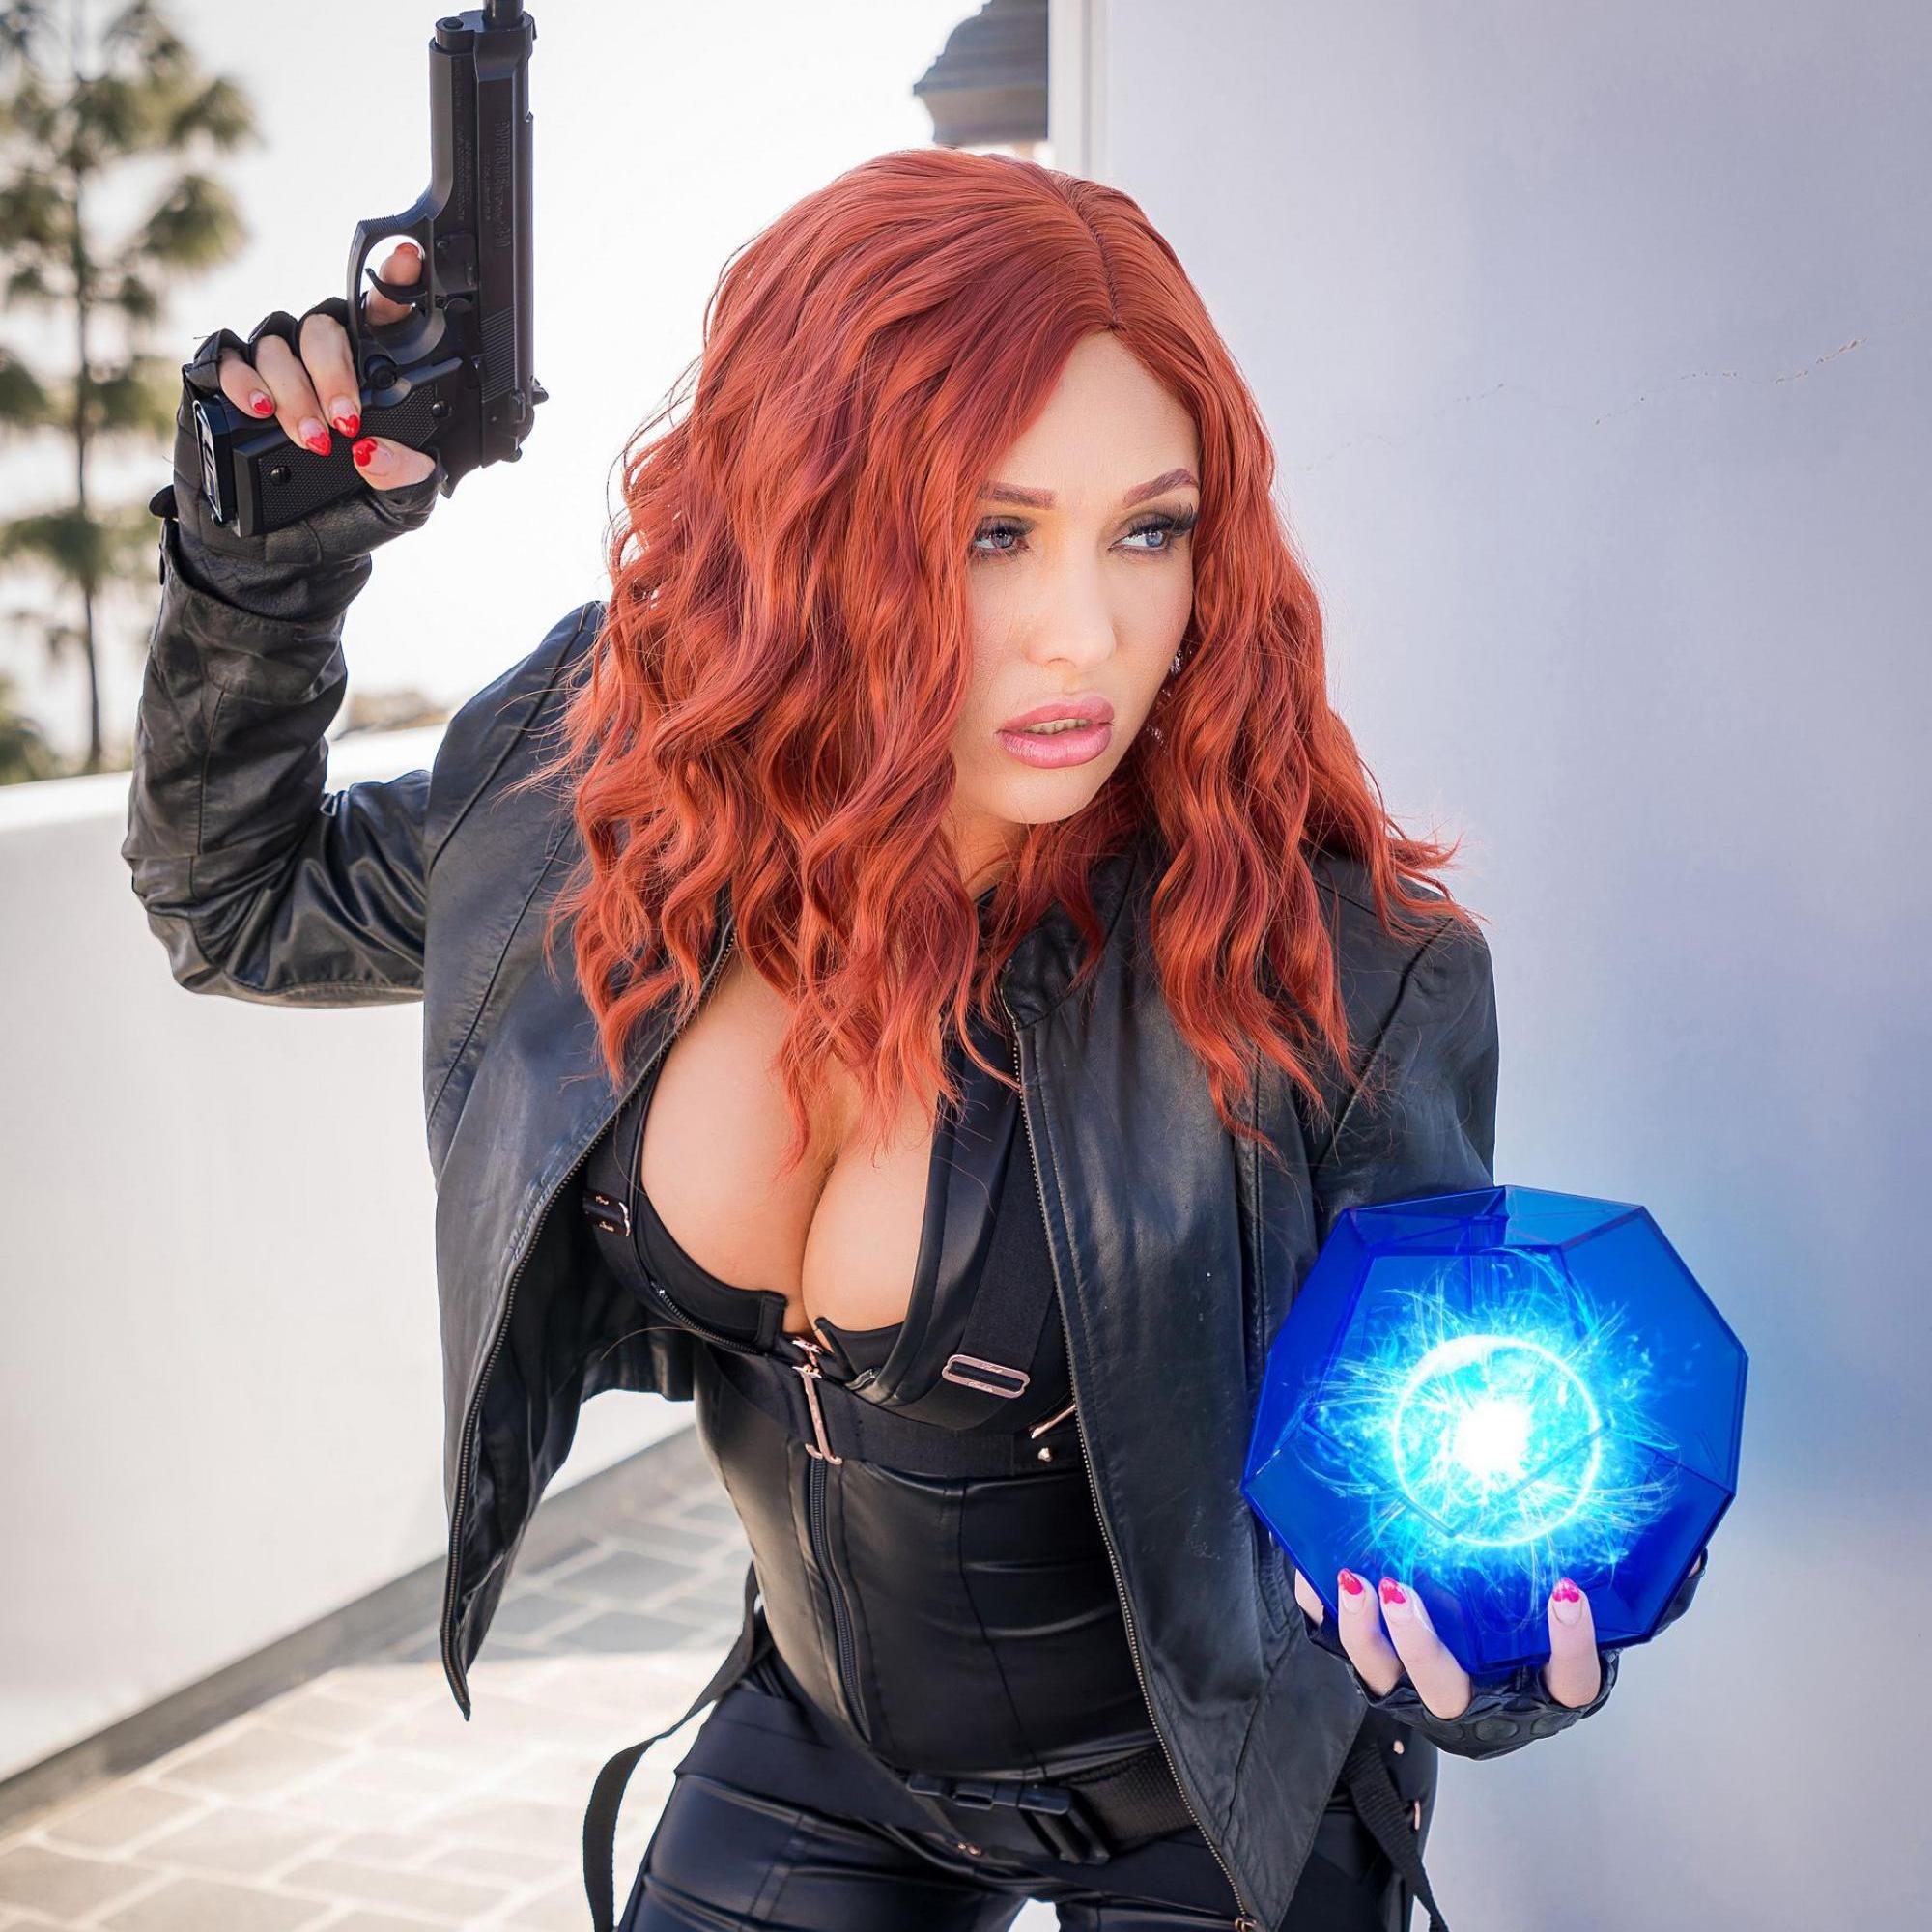 Black Widow is actually Jeanie Marie Sullivan, naked